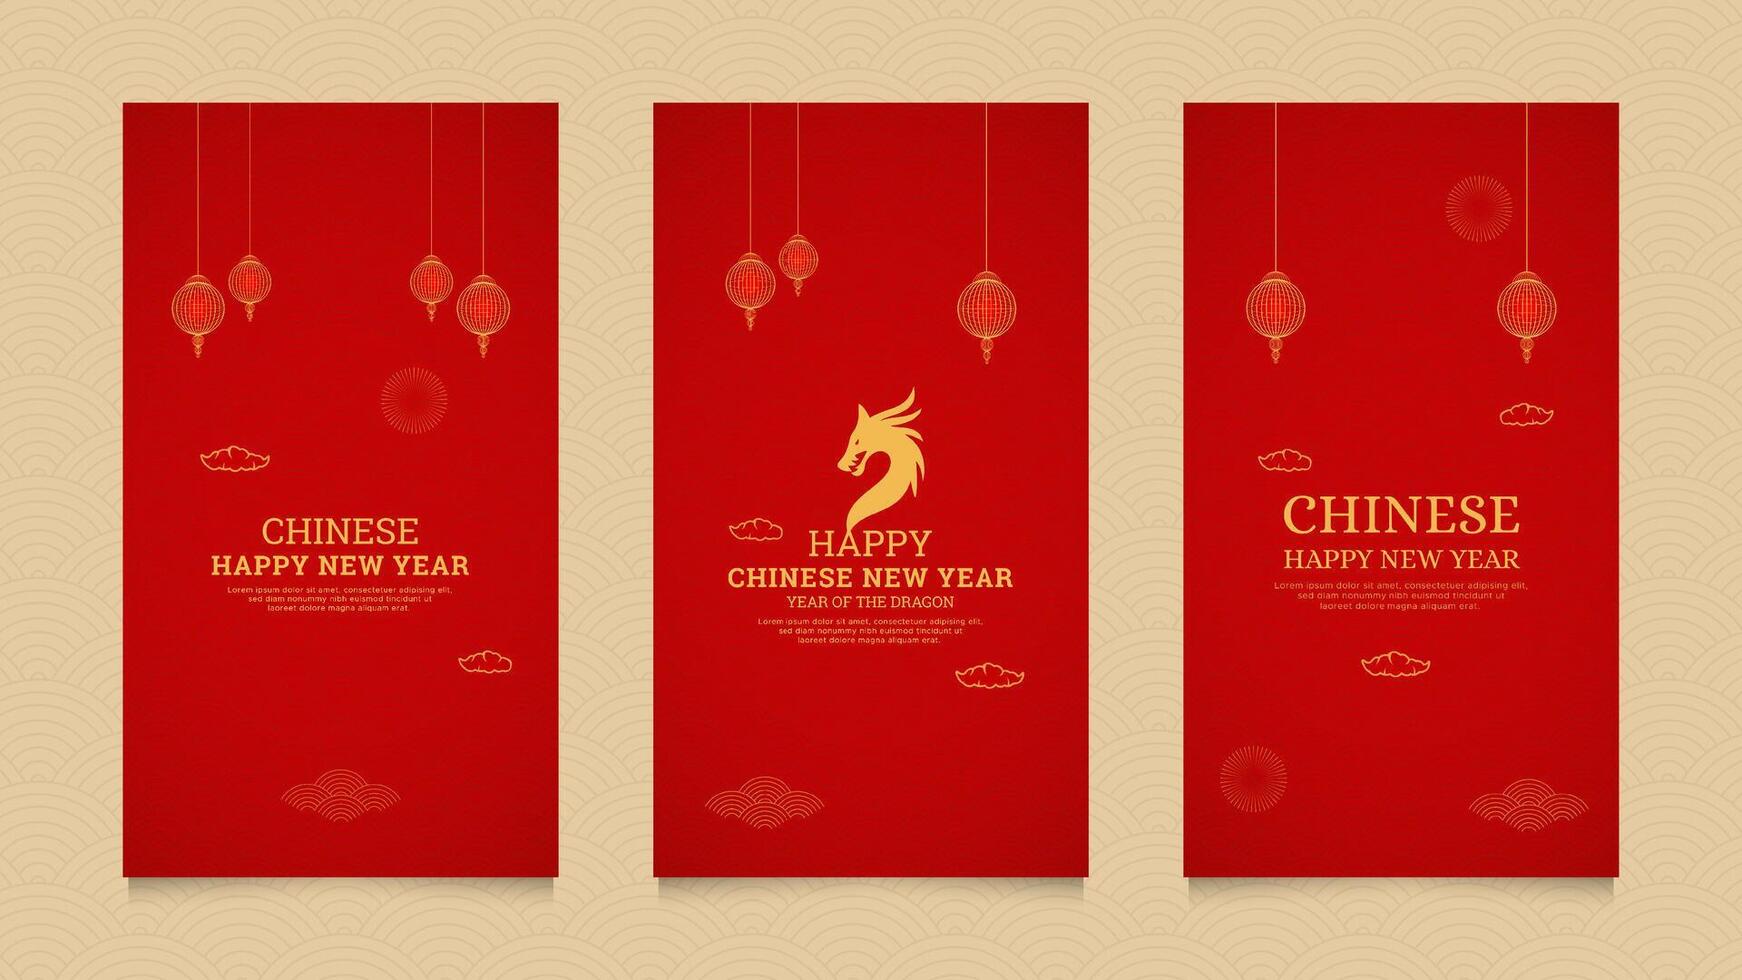 Happy Chinese New Year Social Media Stories Collection Template with Chinese Pattern Brushes Border and Chinese Lanterns vector